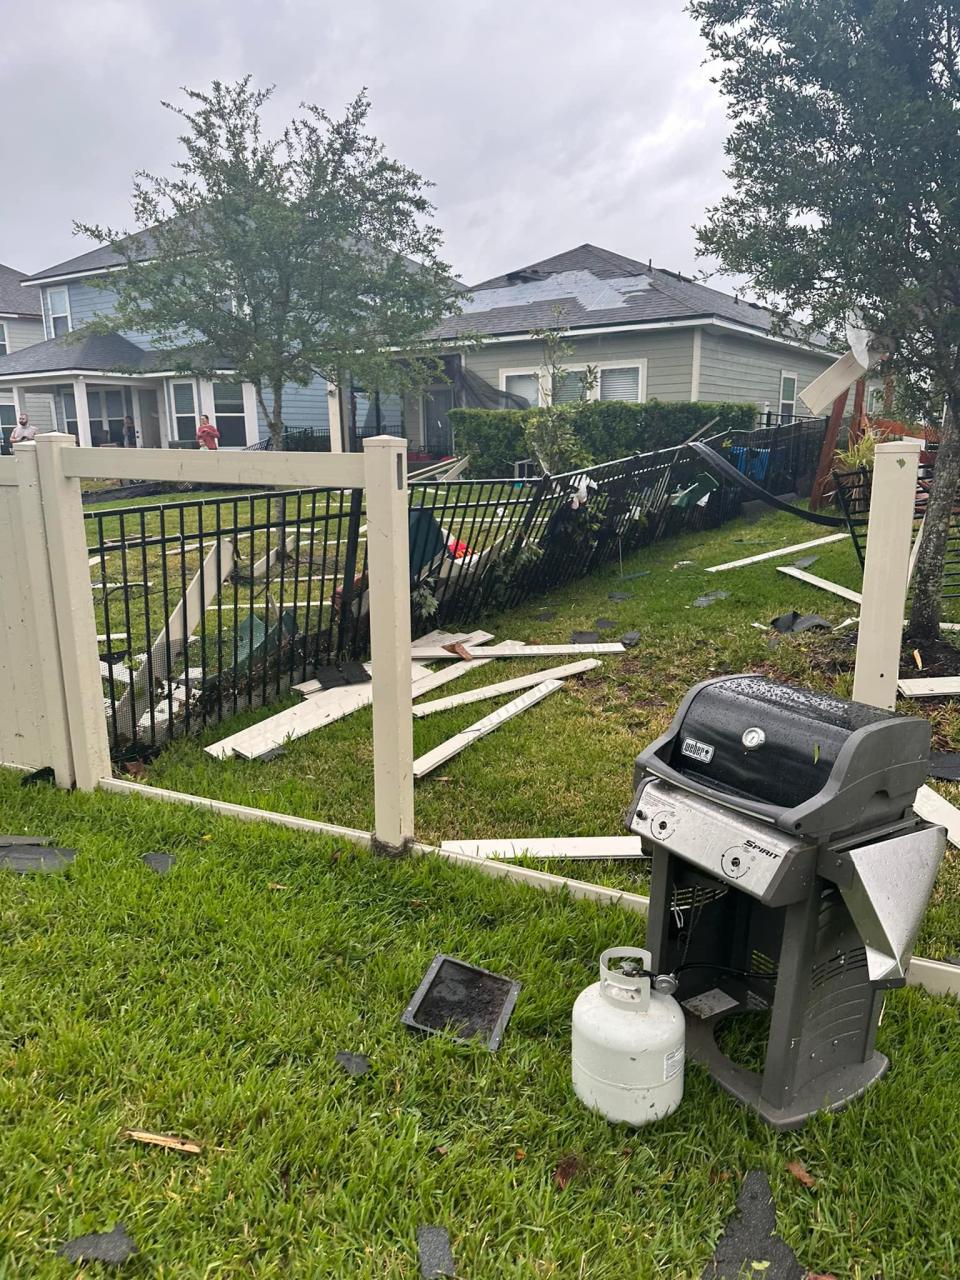 Tornado reportedly touches down in Jacksonville